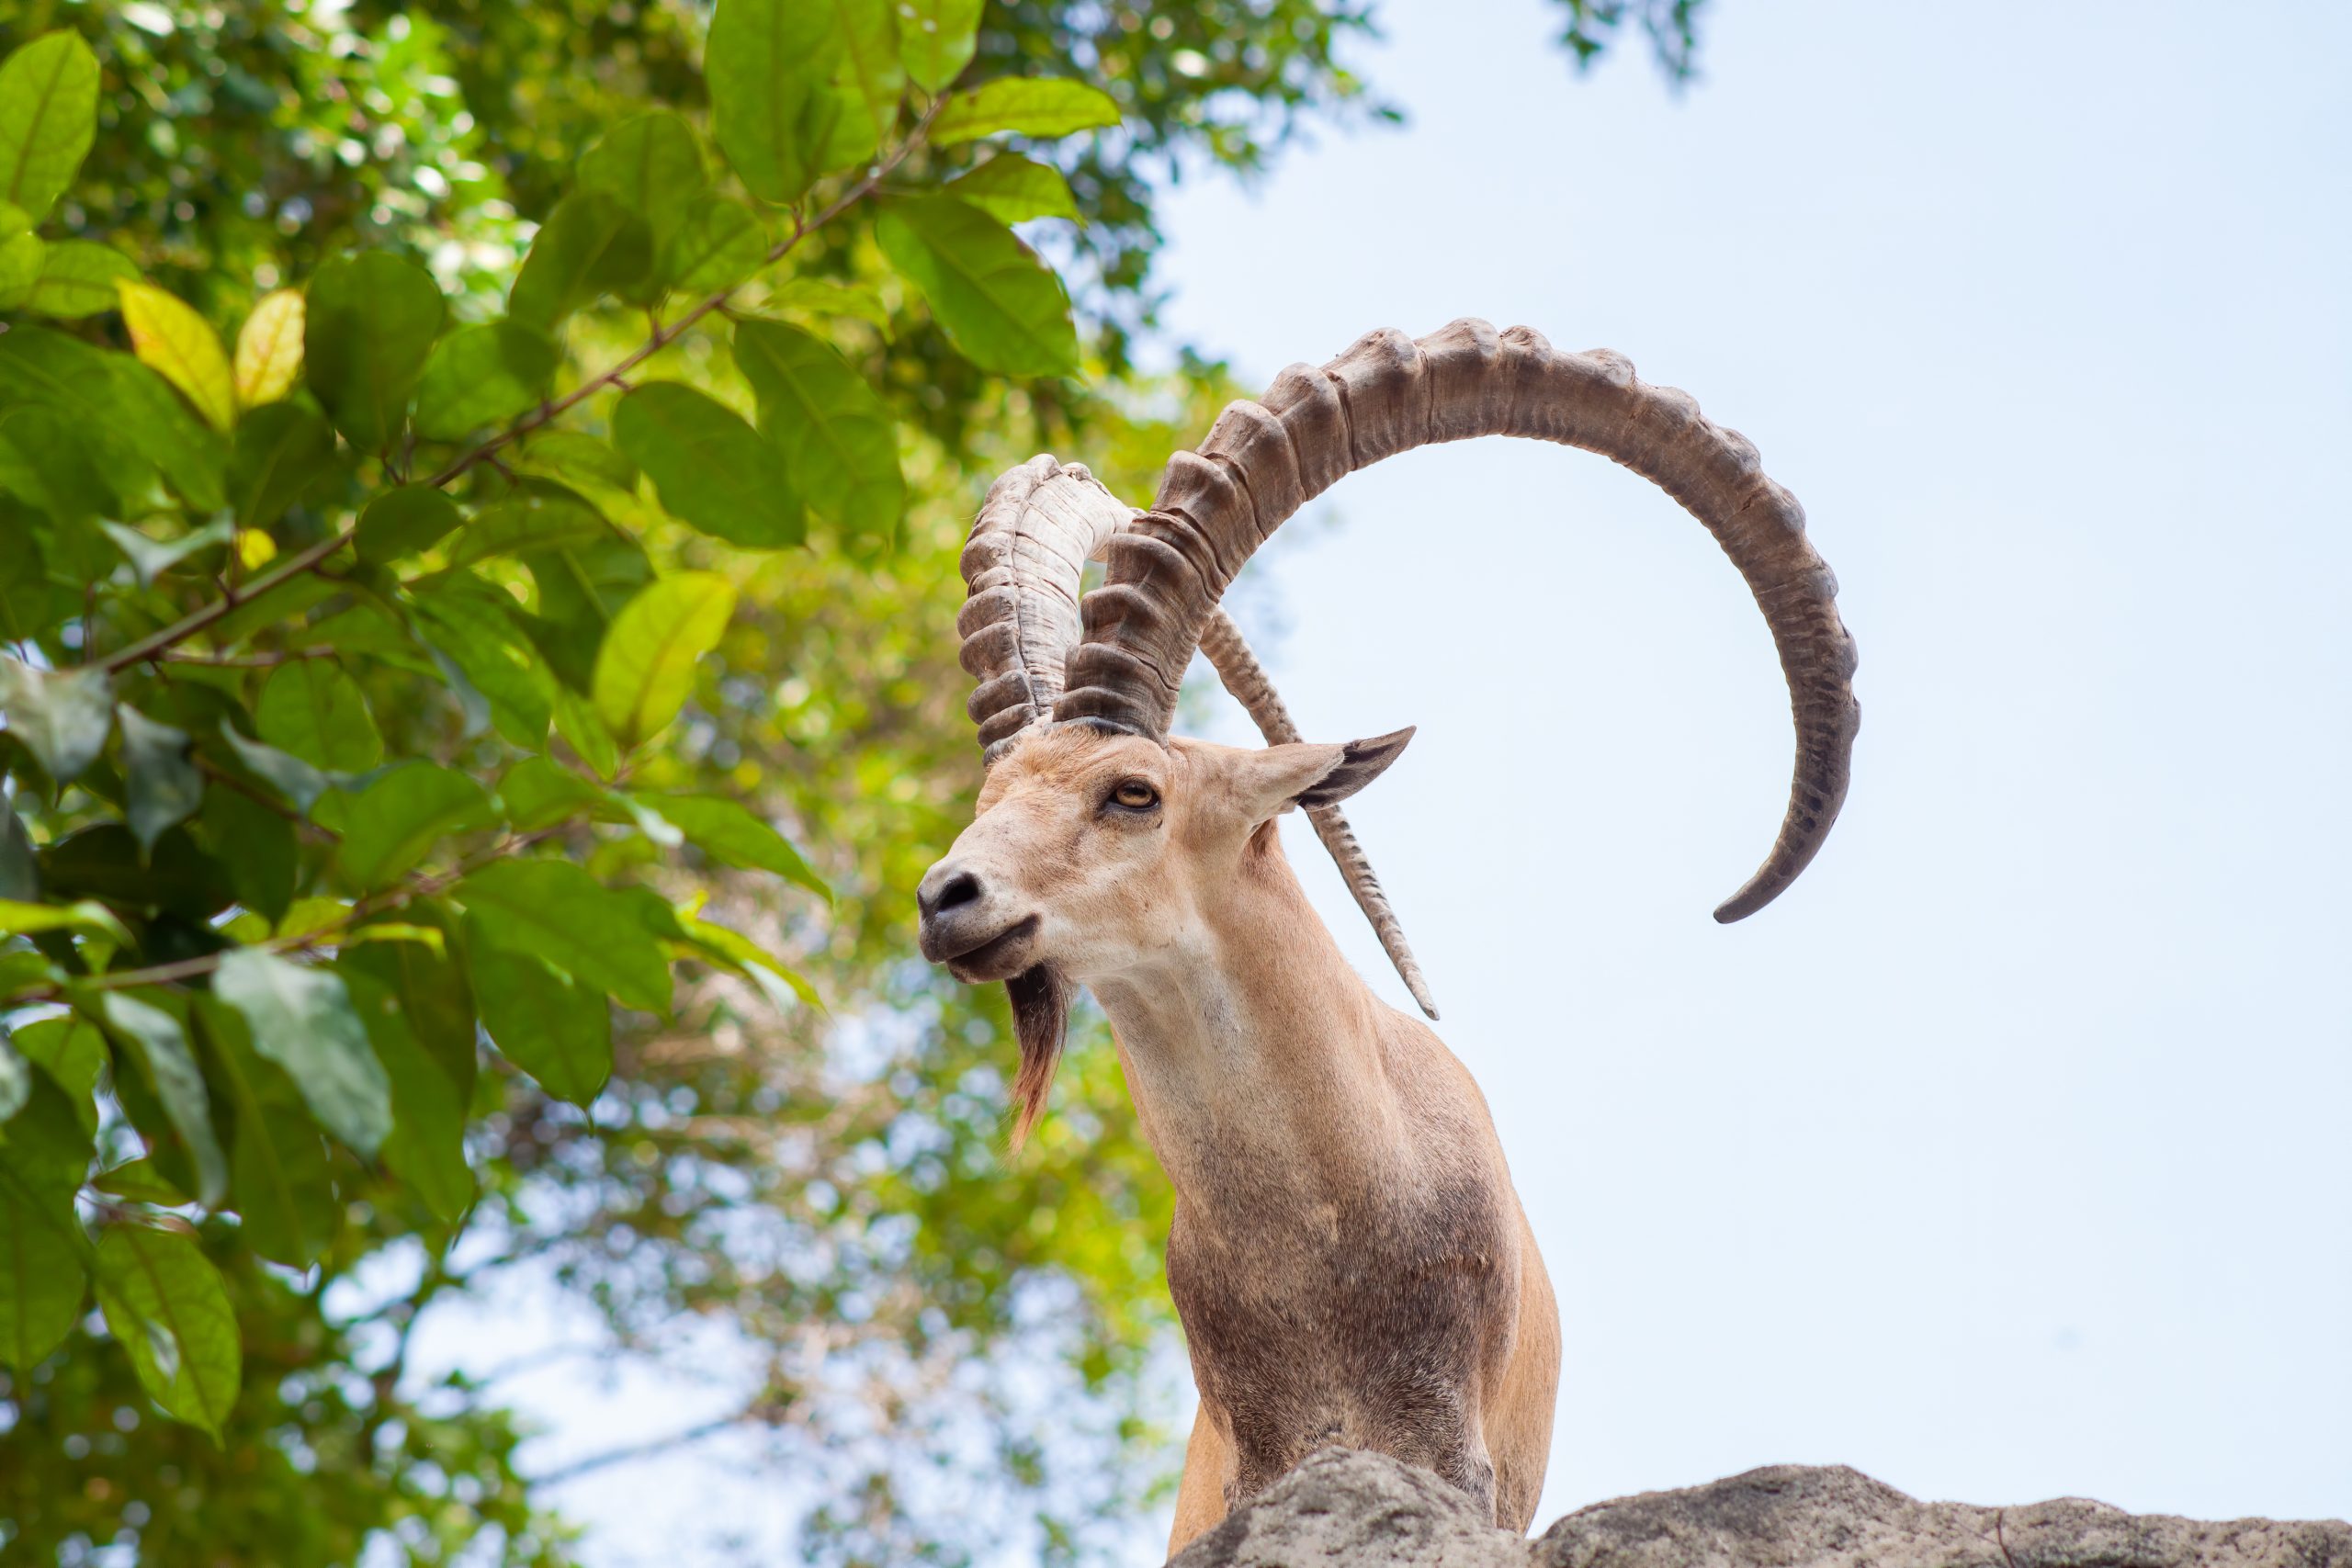 Male Ibex on a cliff showing side profile and full large horns and beard against blue sky.